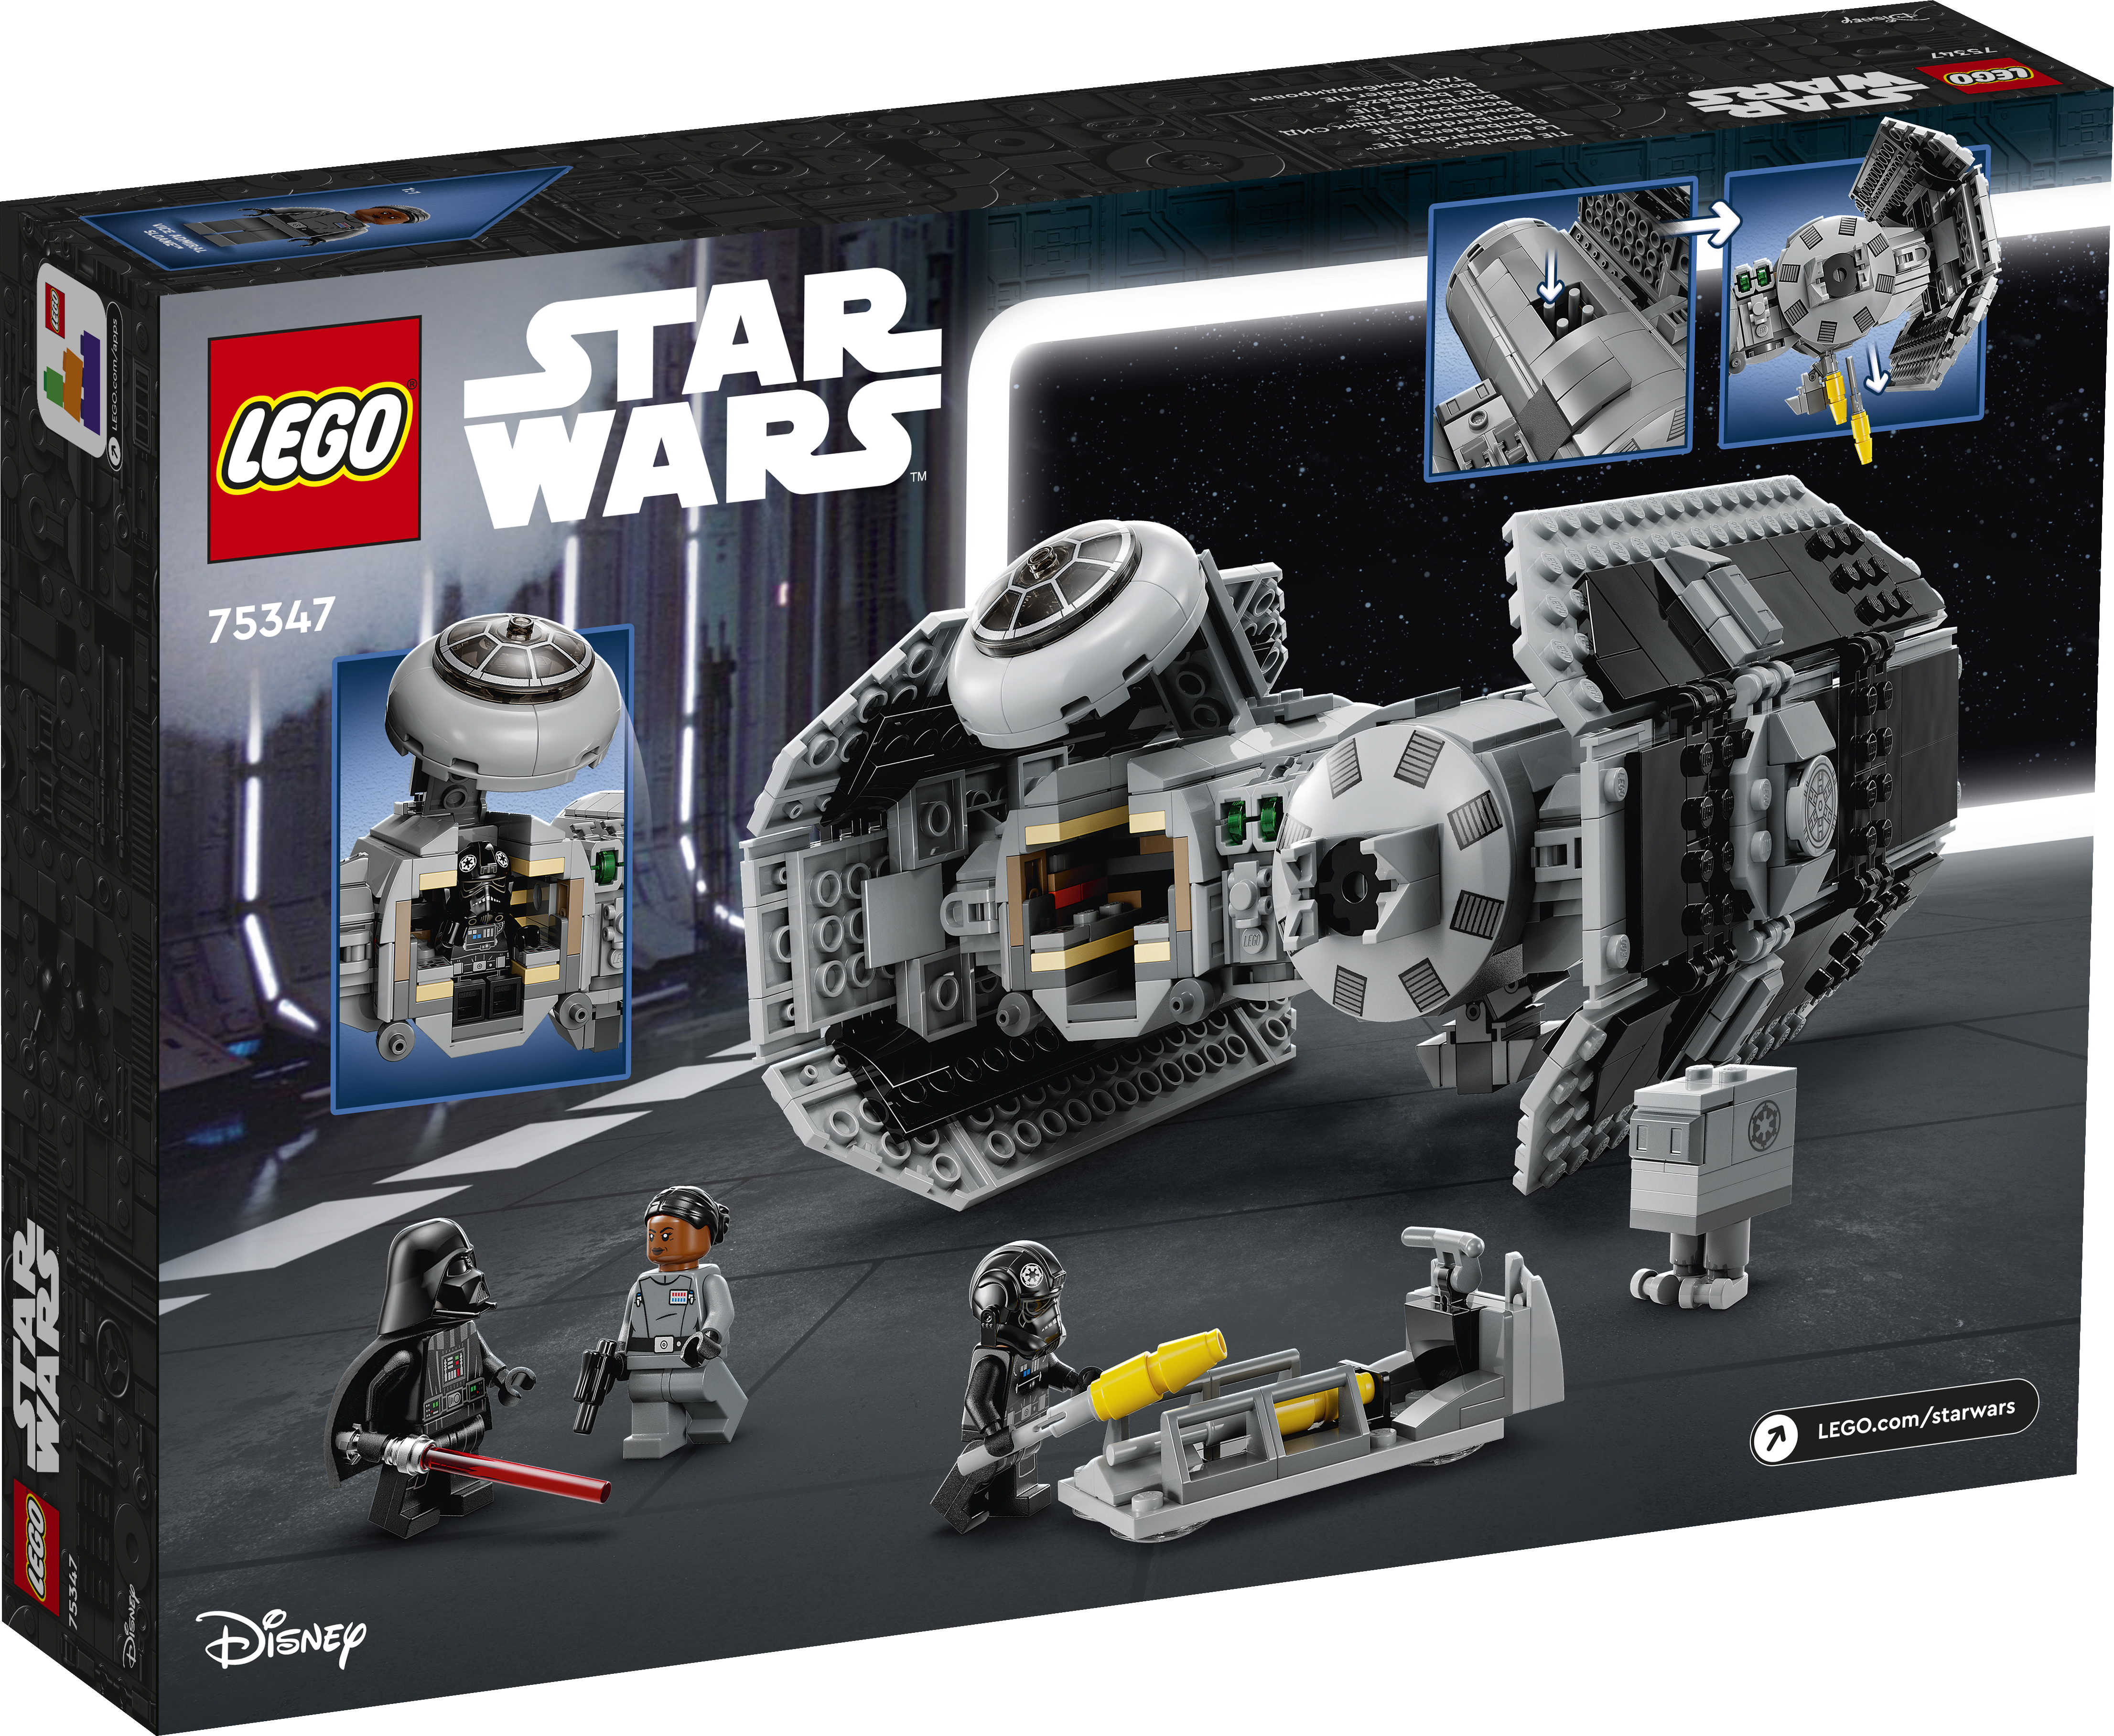 2023 Star Wars sets officially revealed!